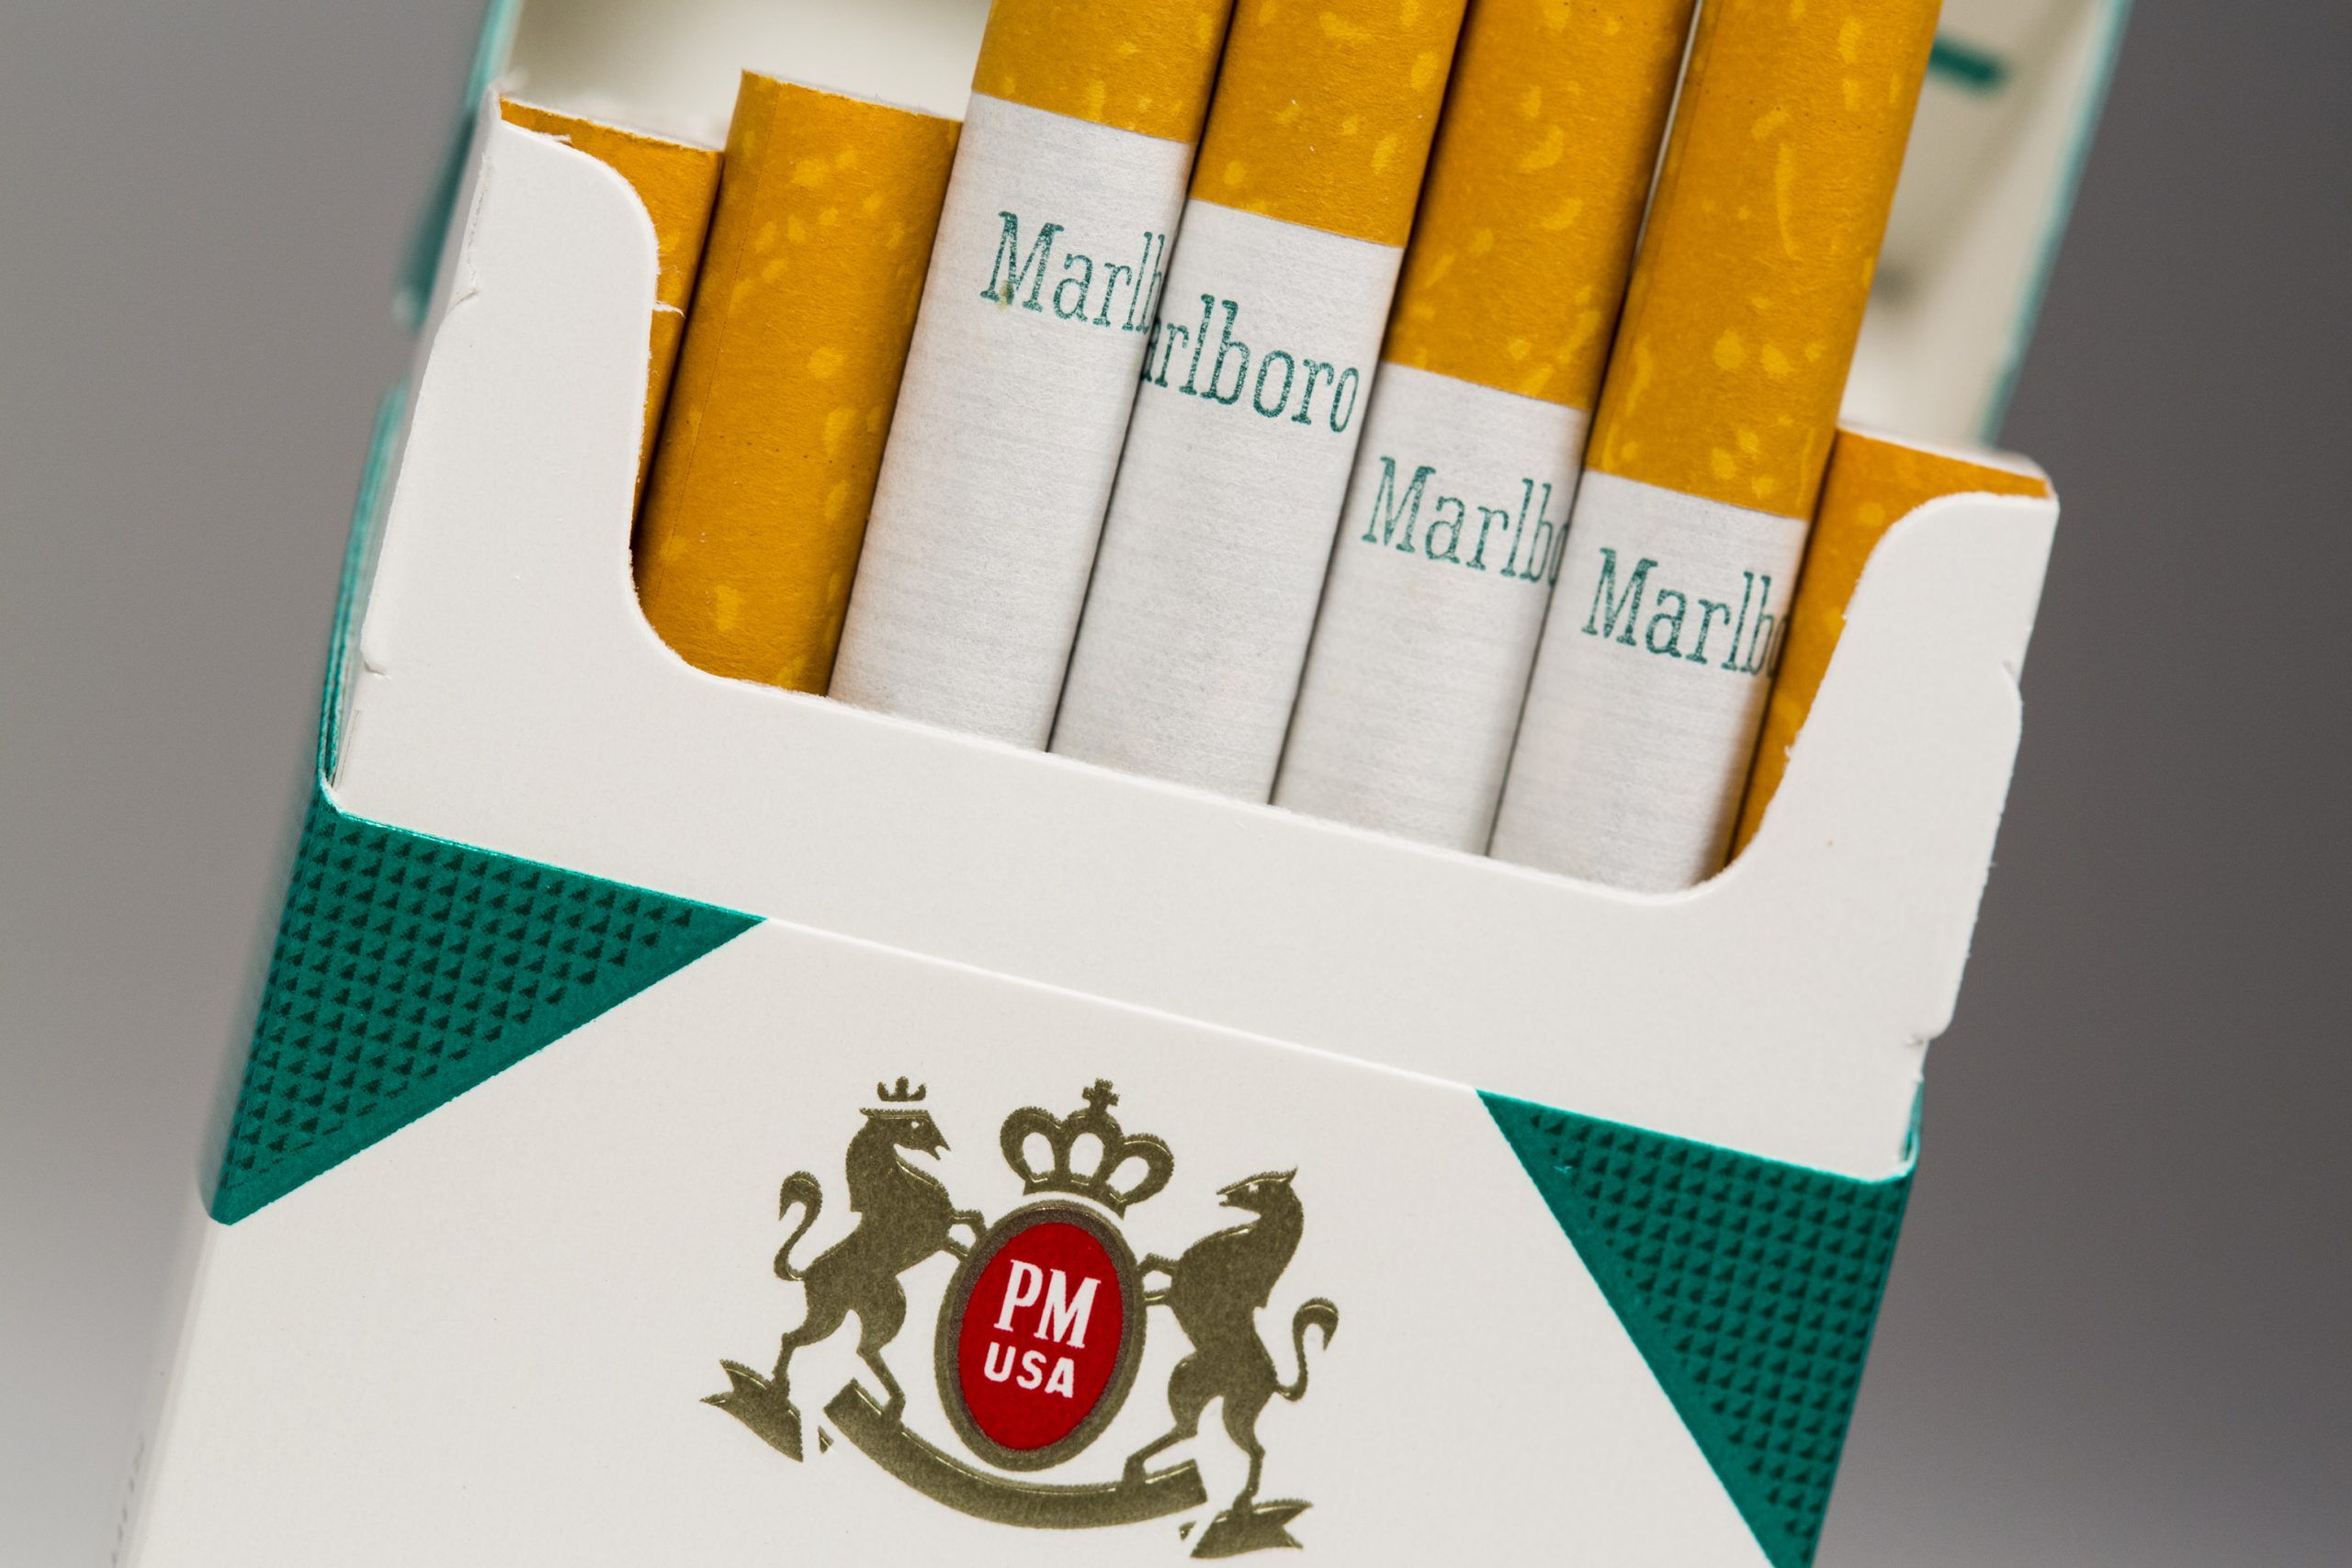 Menthol Tobacco Products are a Public Health Problem